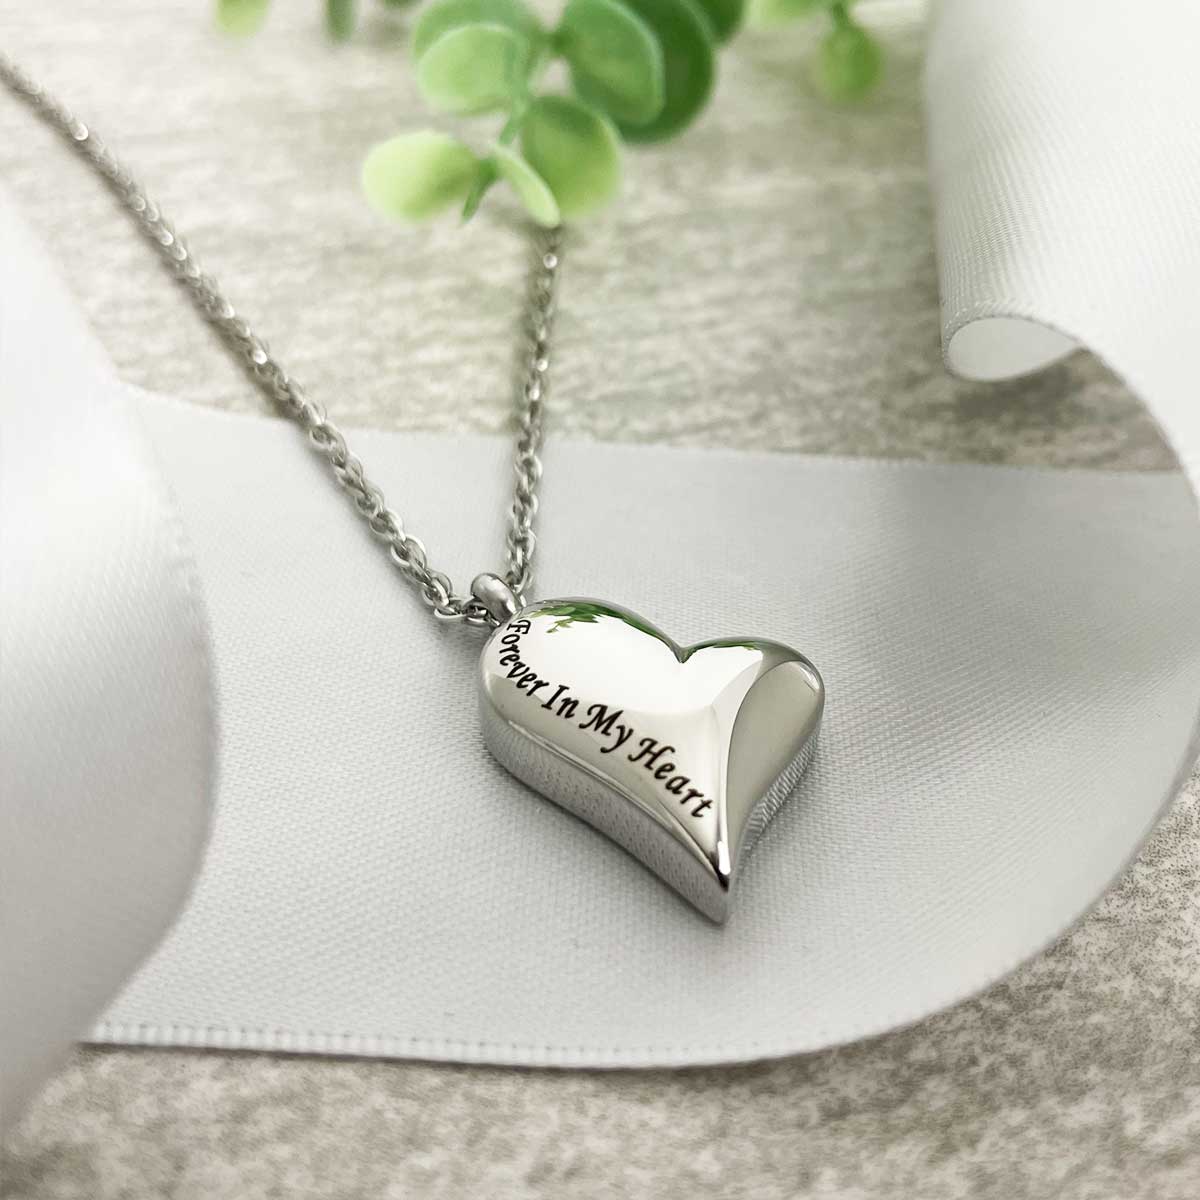 Aniu Dog Cremation Jewelry for Ashes, 925 Sterling Silver Urn Necklace for  Women | eBay